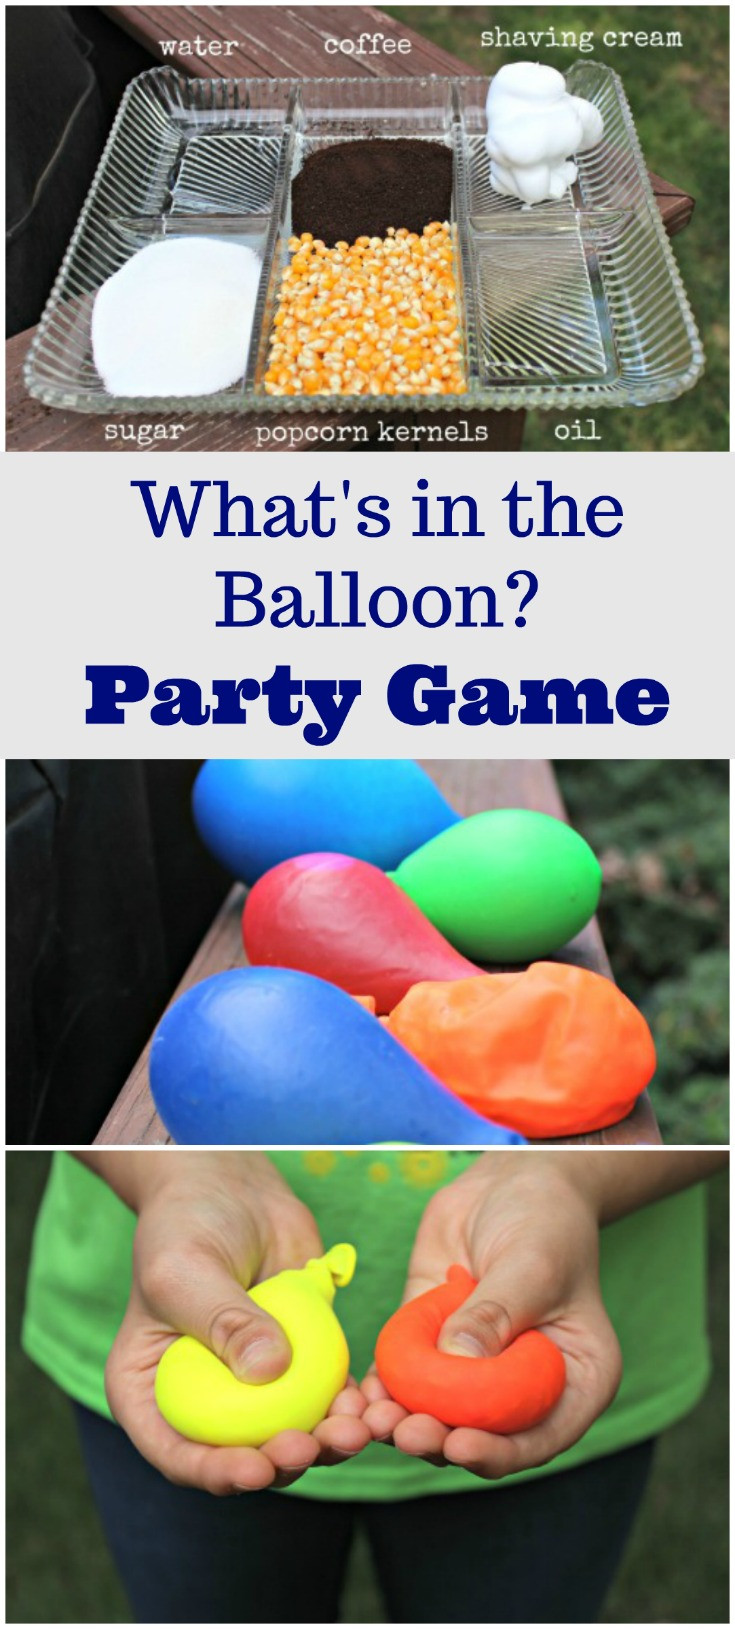 Fun Party Games For Kids
 Fun Party Games Guess What s in the Balloon Edventures